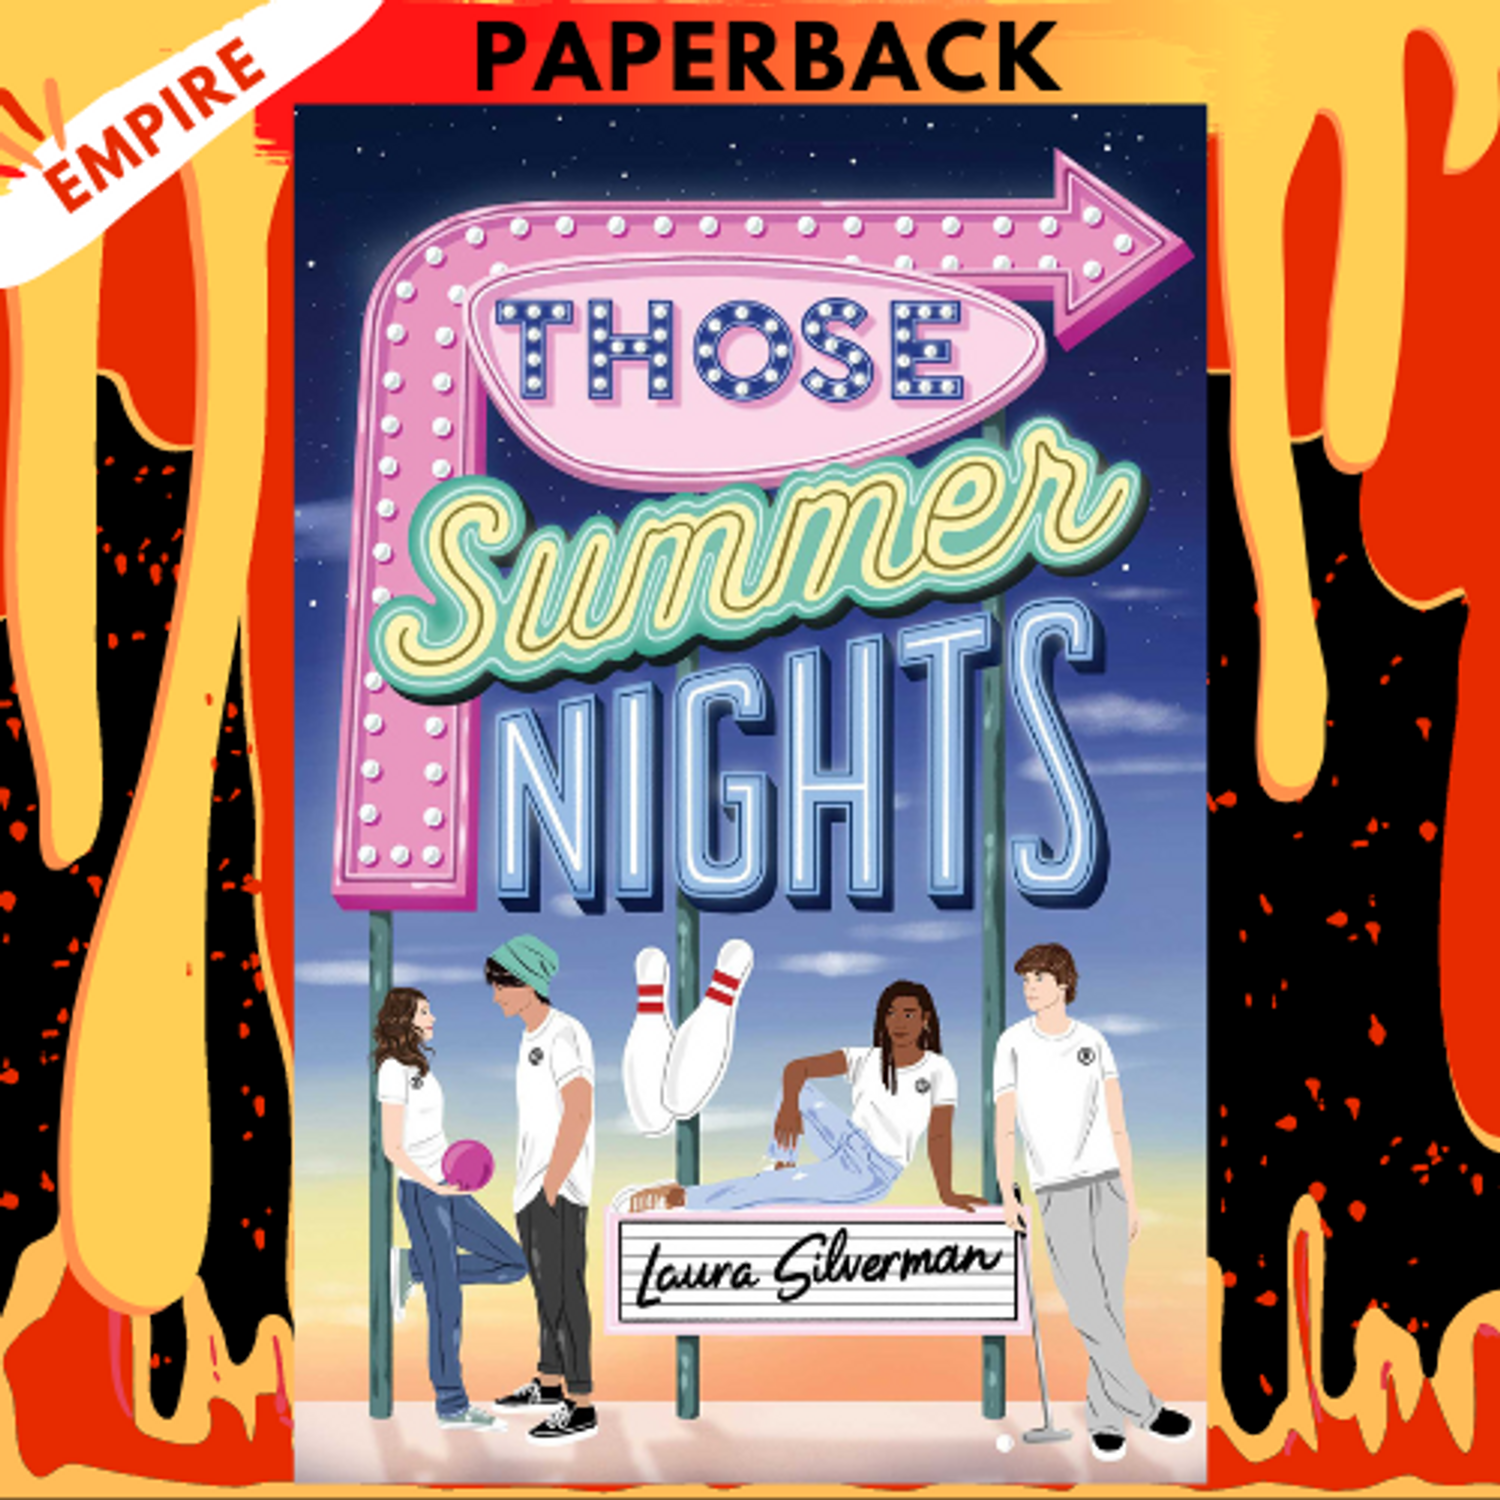 Those Summer Nights by Laura Silverman